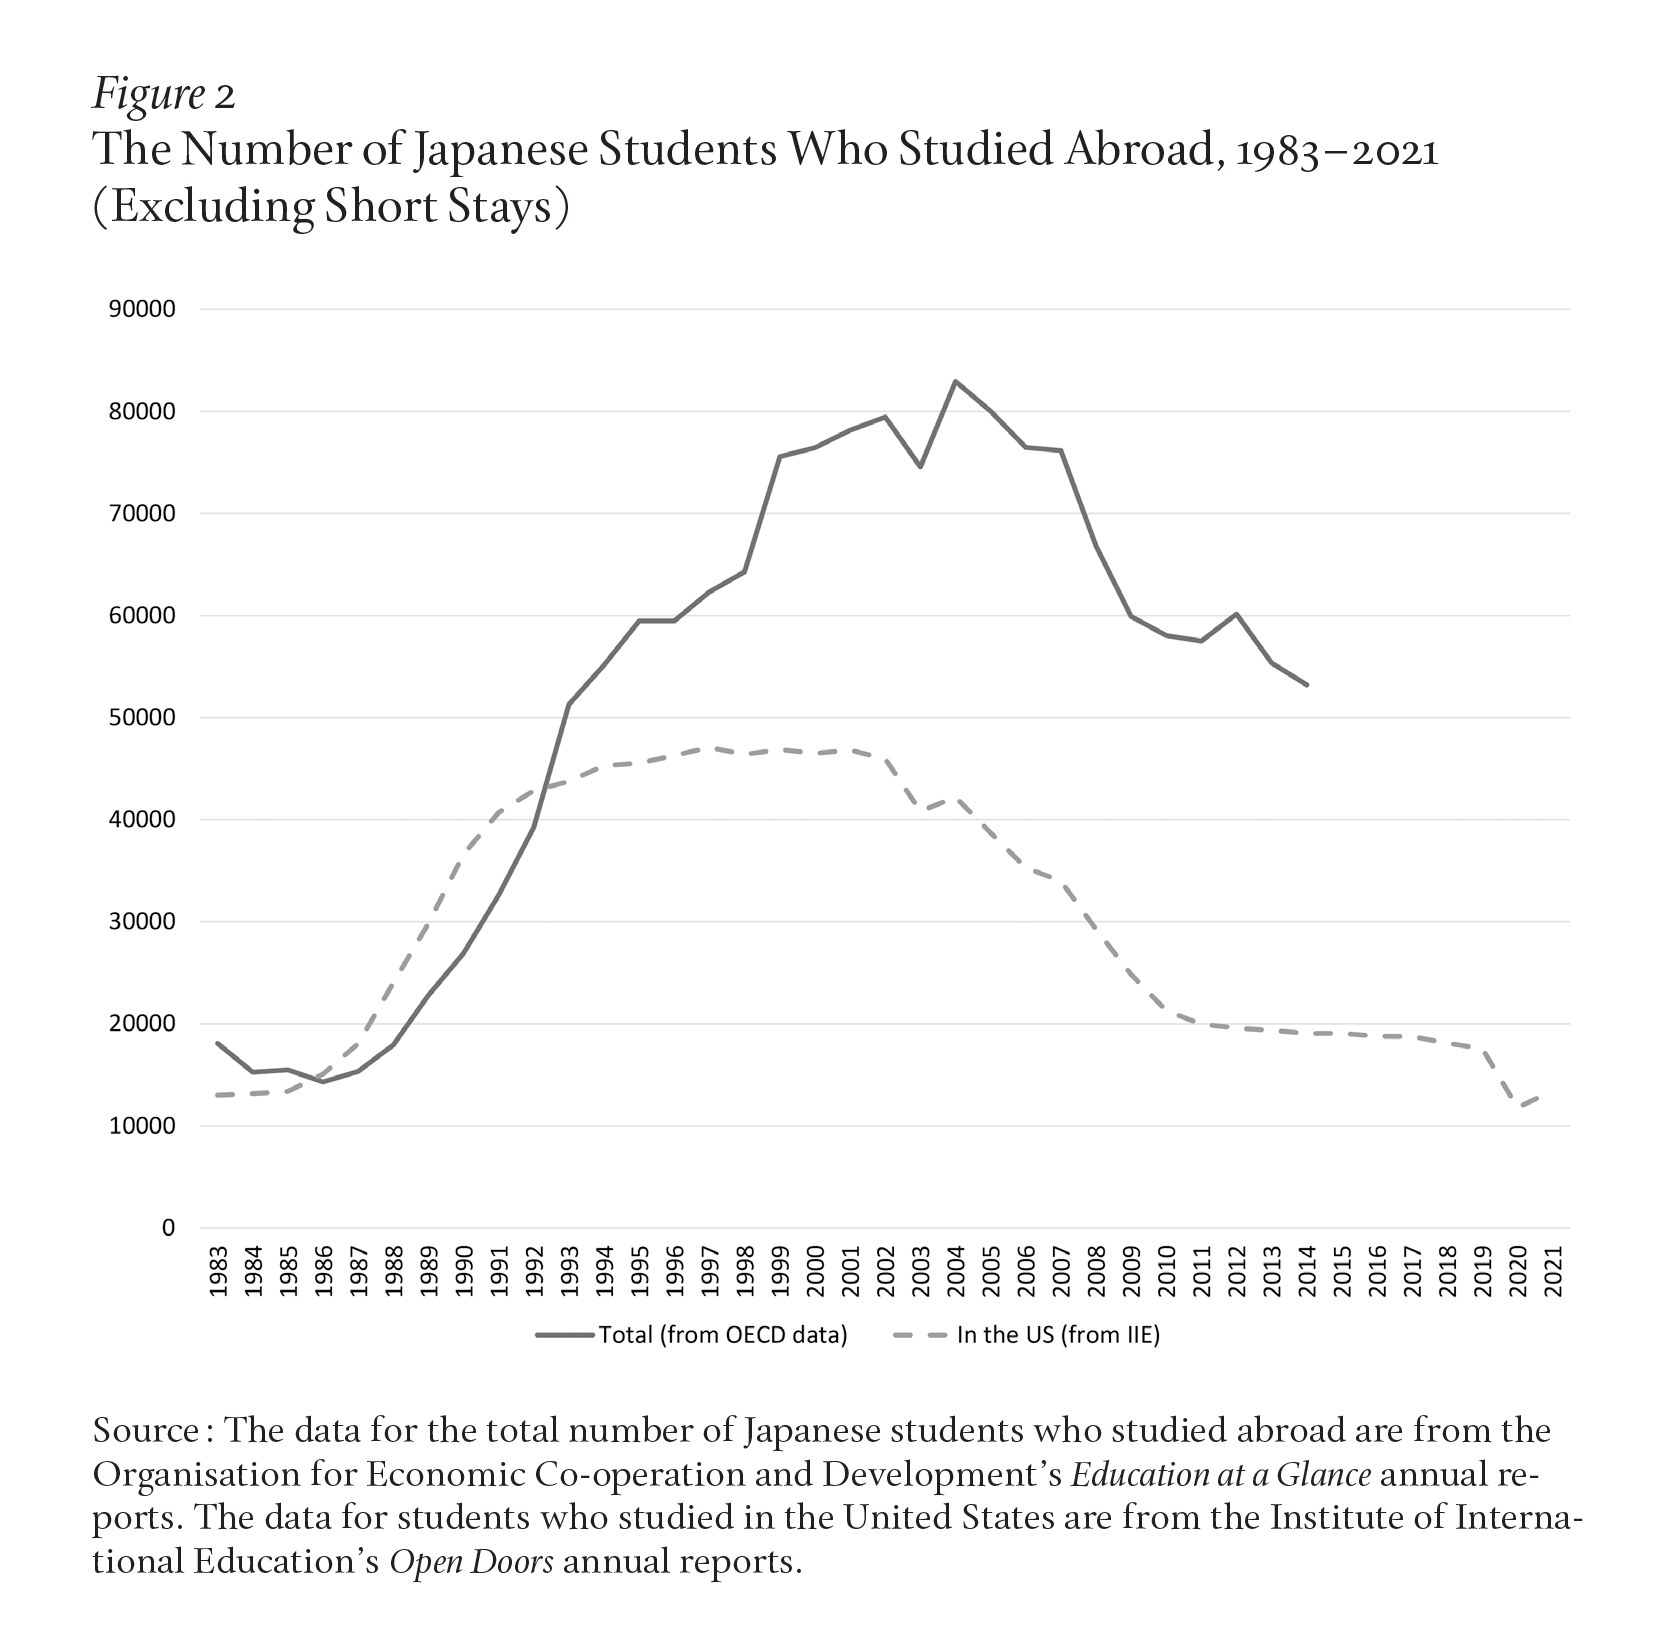 A line graph shows the number of Japanese students who studied abroad went from roughly 20,000 to 80,000, before decreasing to 50,000 in 1983-2021. During the same period, the number of Japanese students studying in the United States went from roughly 10,000 to 50,000, before returning to 10,000.